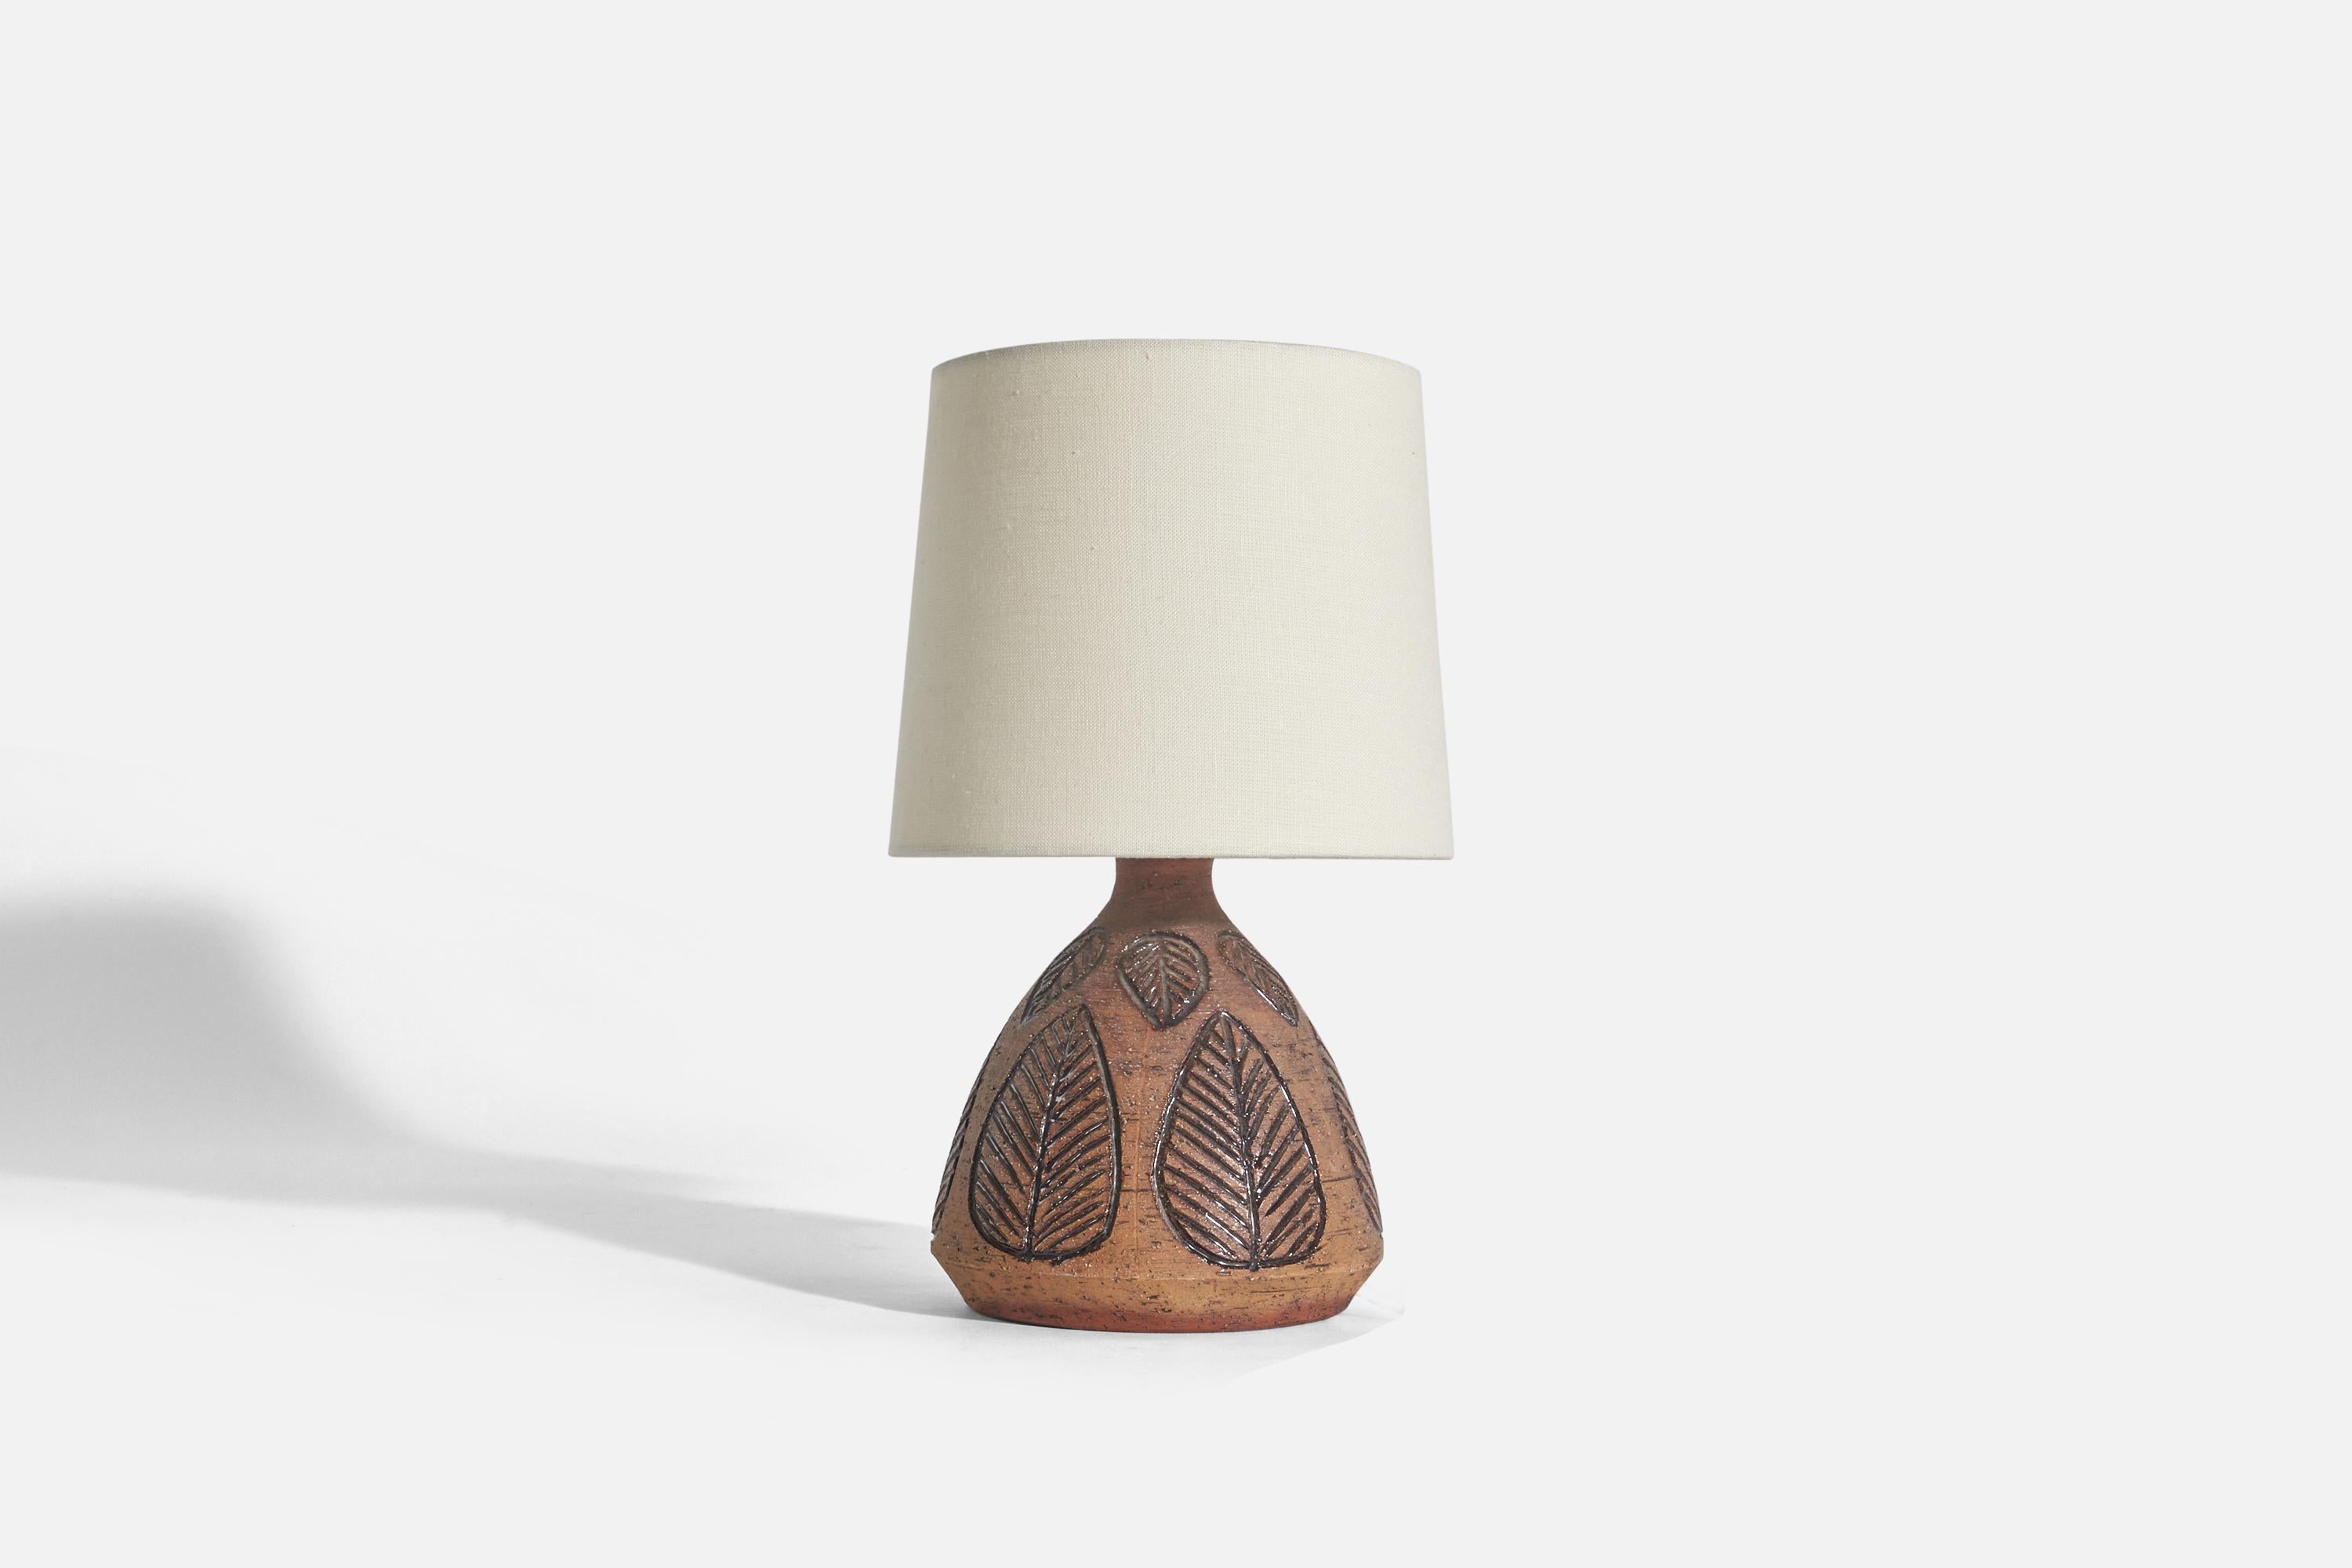 A brown, glazed and incised stoneware table lamp designed and produced in Sweden, c. 1970s.

Sold without Lampshade(s)
Dimensions of Lamp (inches) : 9.18 x 6.43 x 6.43 (Height x Width x Depth)
Dimensions of Shade (inches) : 7 x 8 x 7 (Top Diameter x